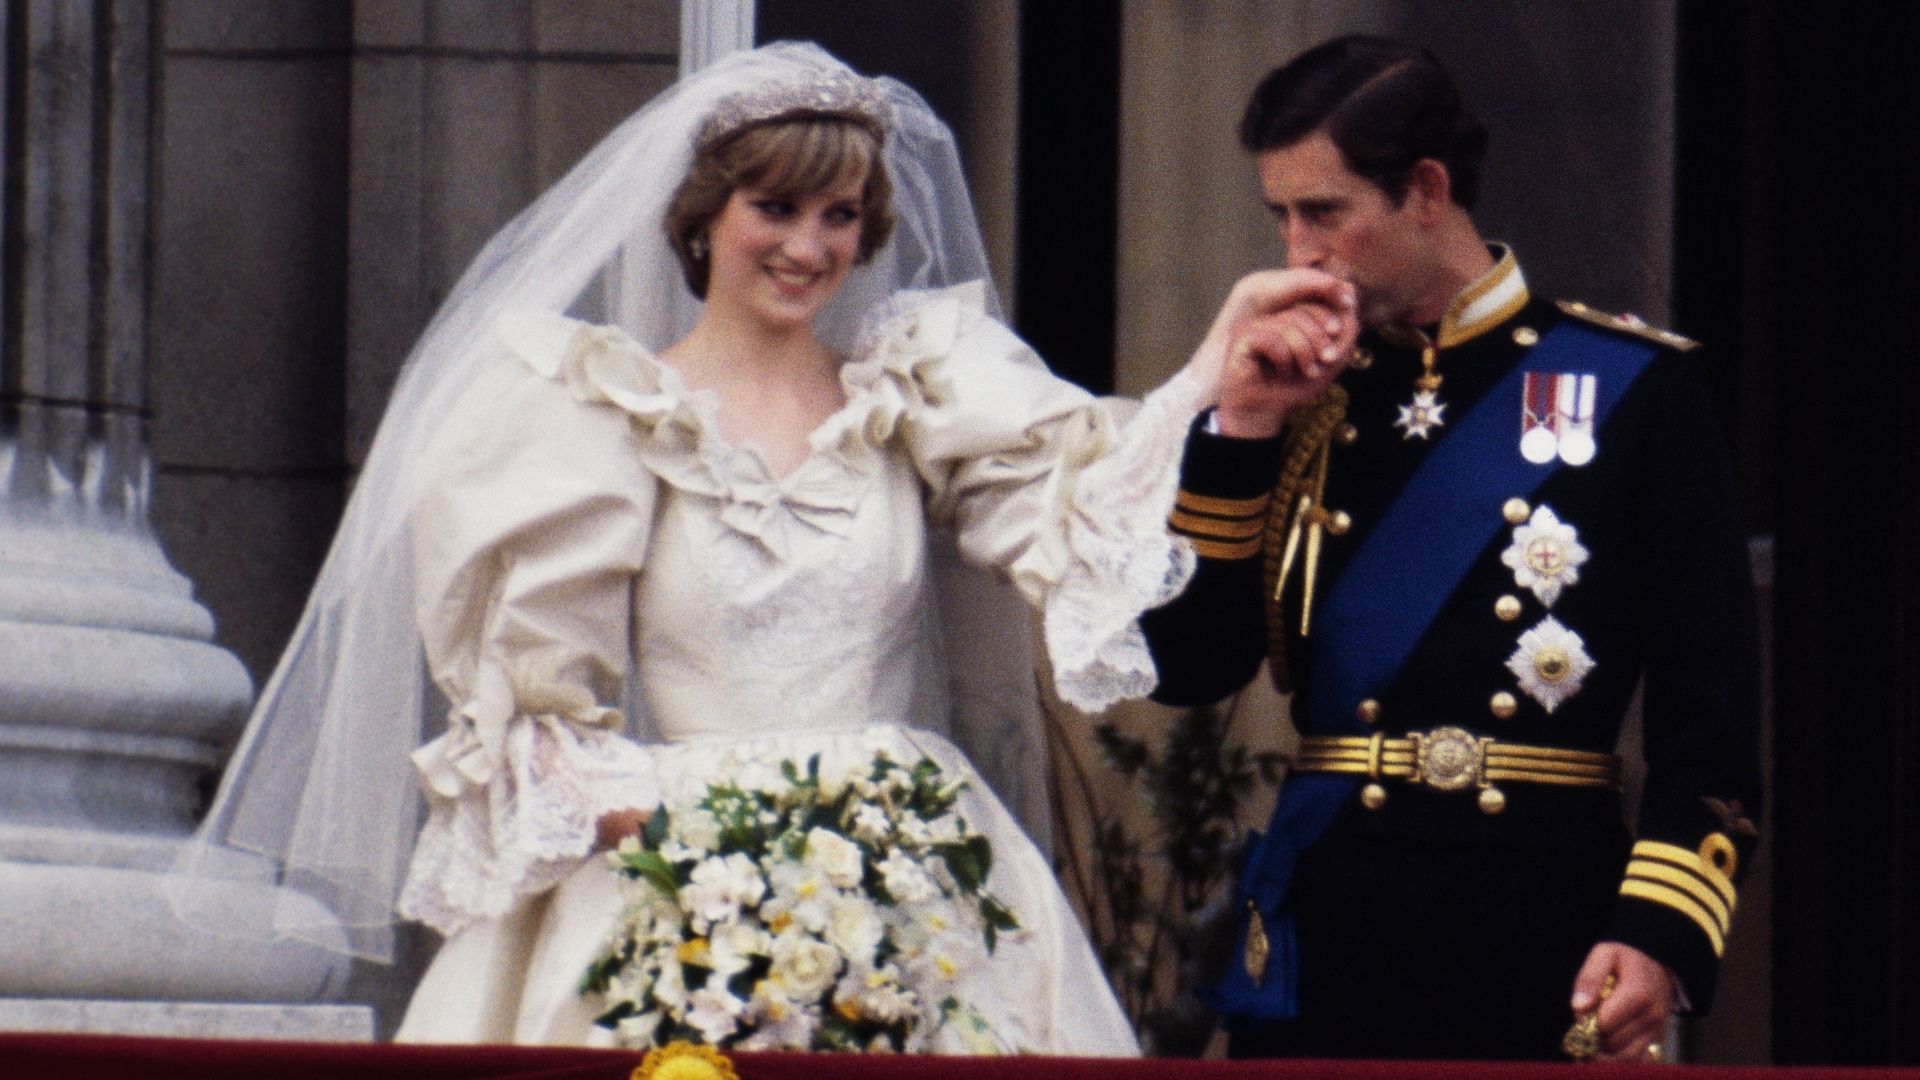 <p>                     Taking place on the 29 July 1981, Charles and Diana's wedding was one of the biggest weddings of all time and around 750 million people watched it on television around the globe. It was largely regarded as the "wedding of the century" and Diana's dress is one of the all-time most iconic royal wedding dresses. It was also reported that Diana had a secret wedding dress that for some reason disappeared and was very different from the one she wore.                   </p>